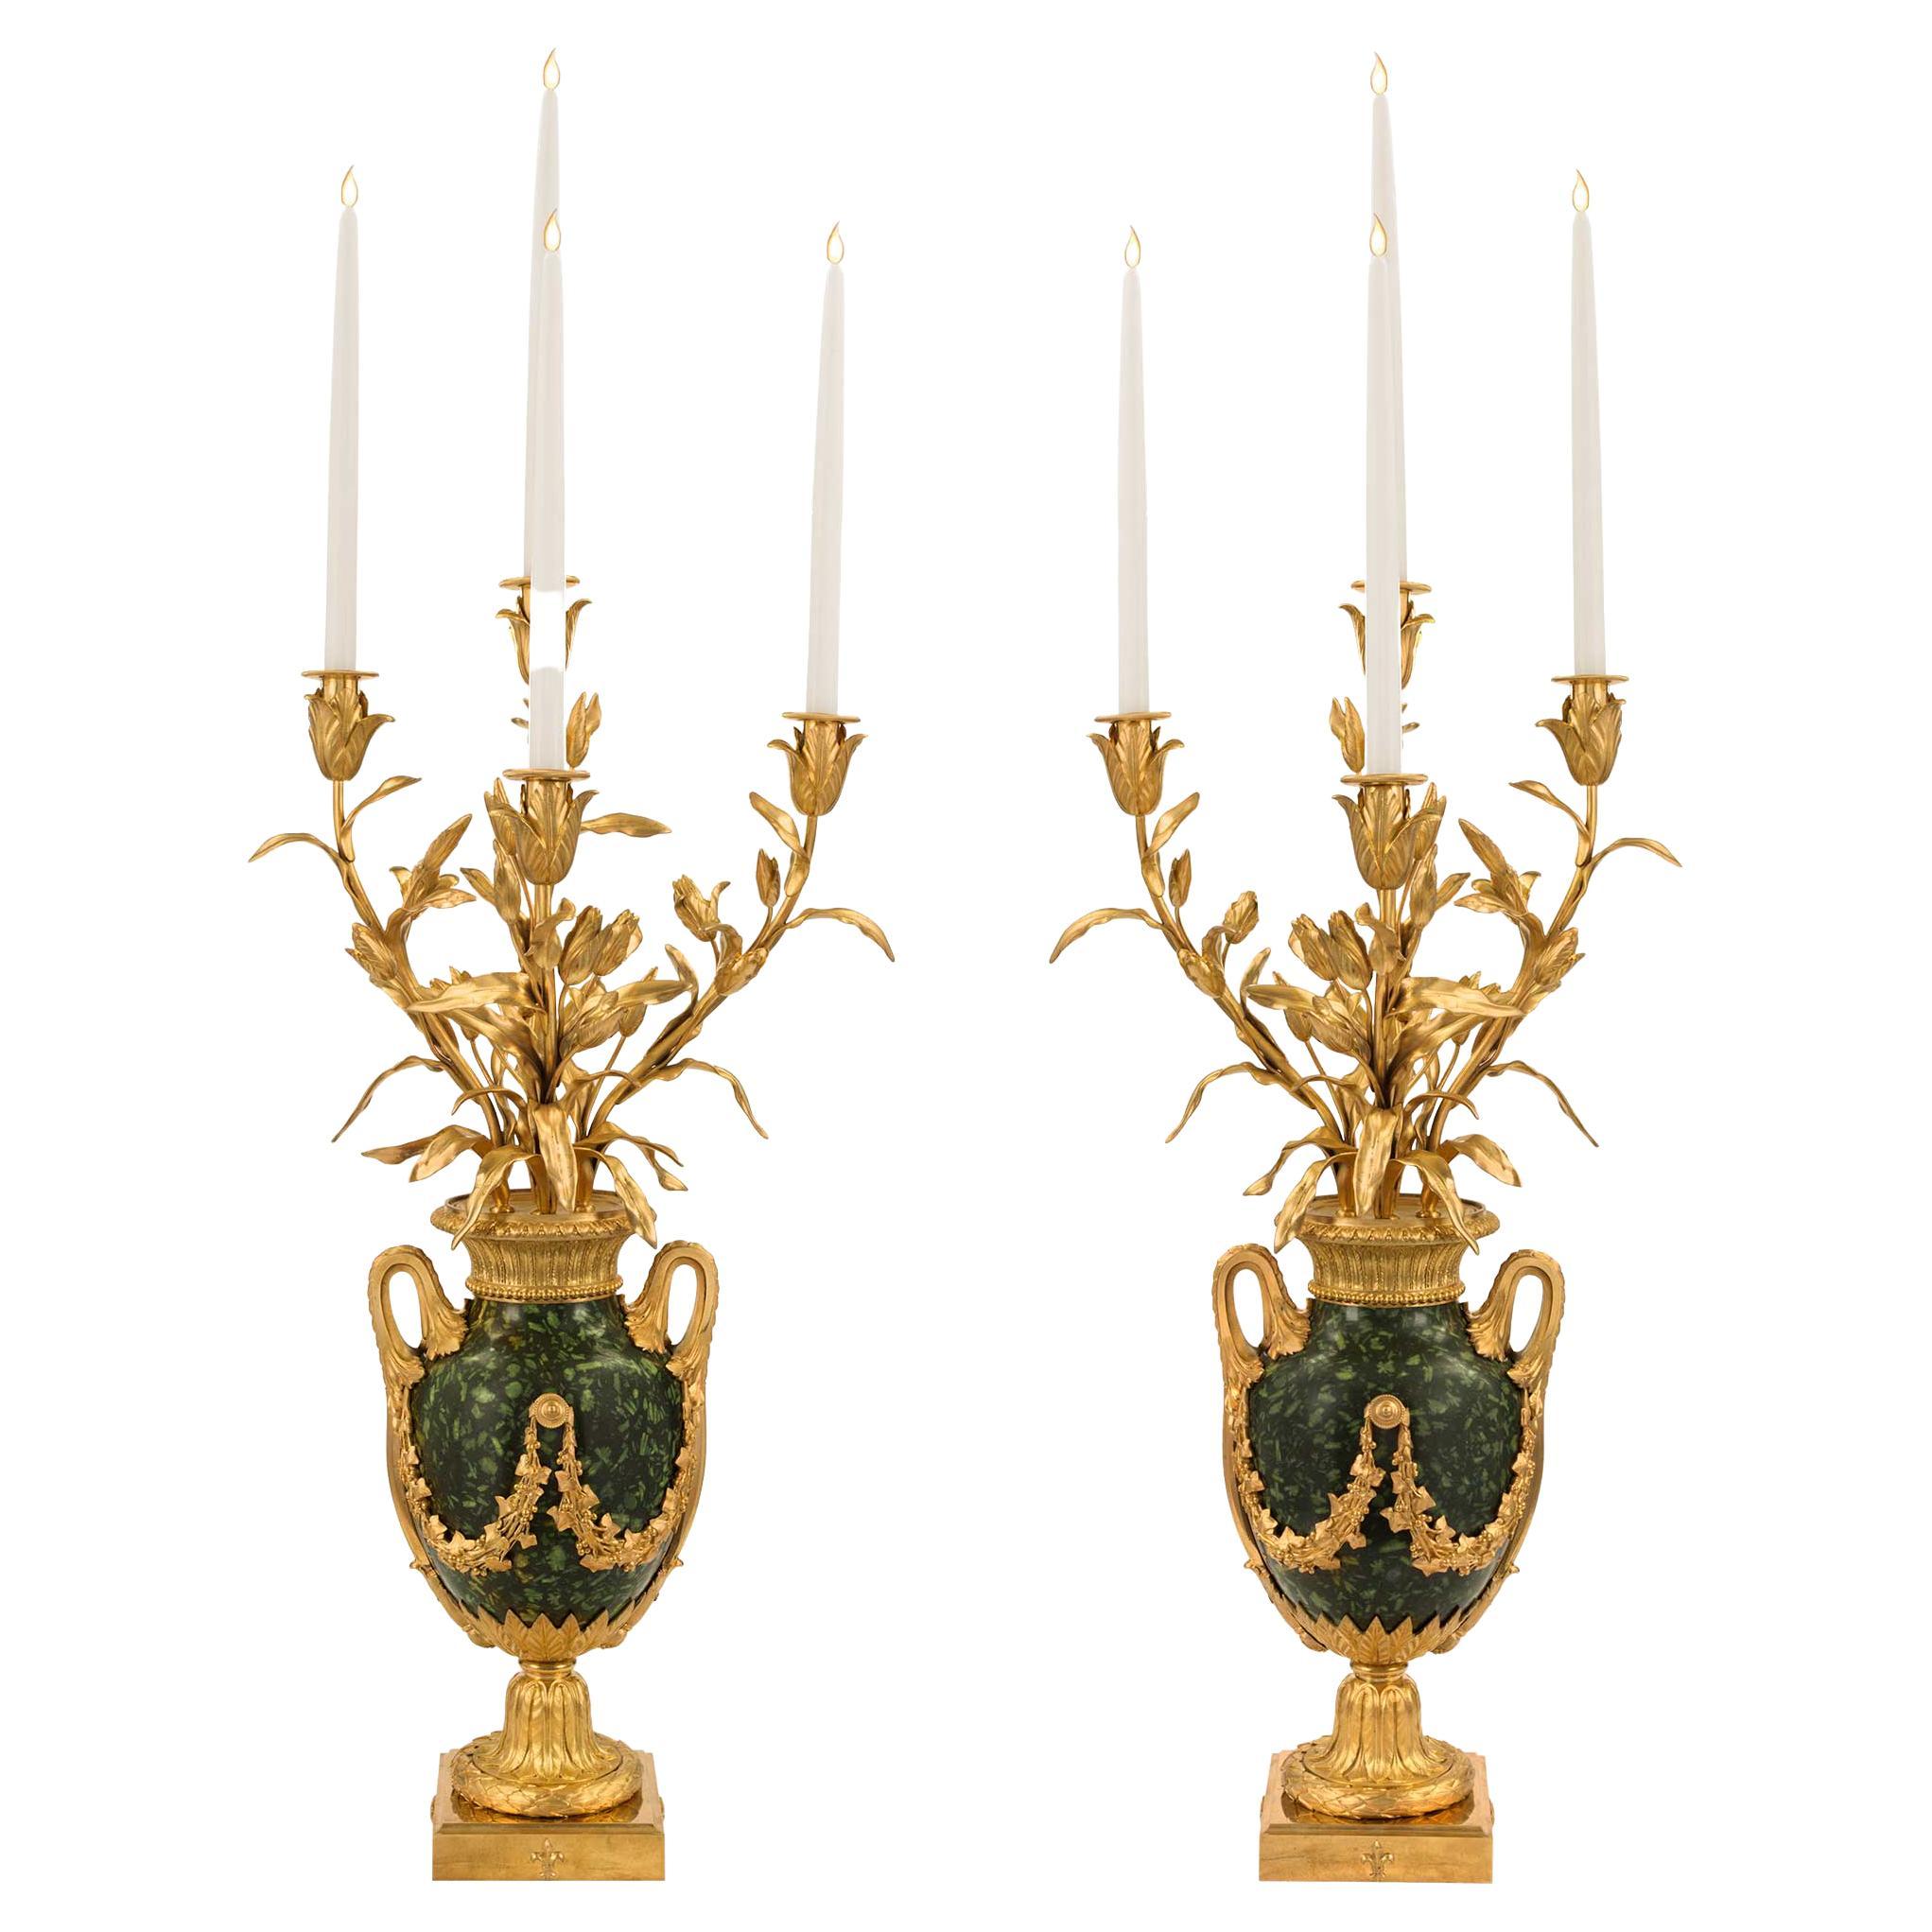 Pair of French 19th Century Louis XVI Style Four-Arm Candelabras